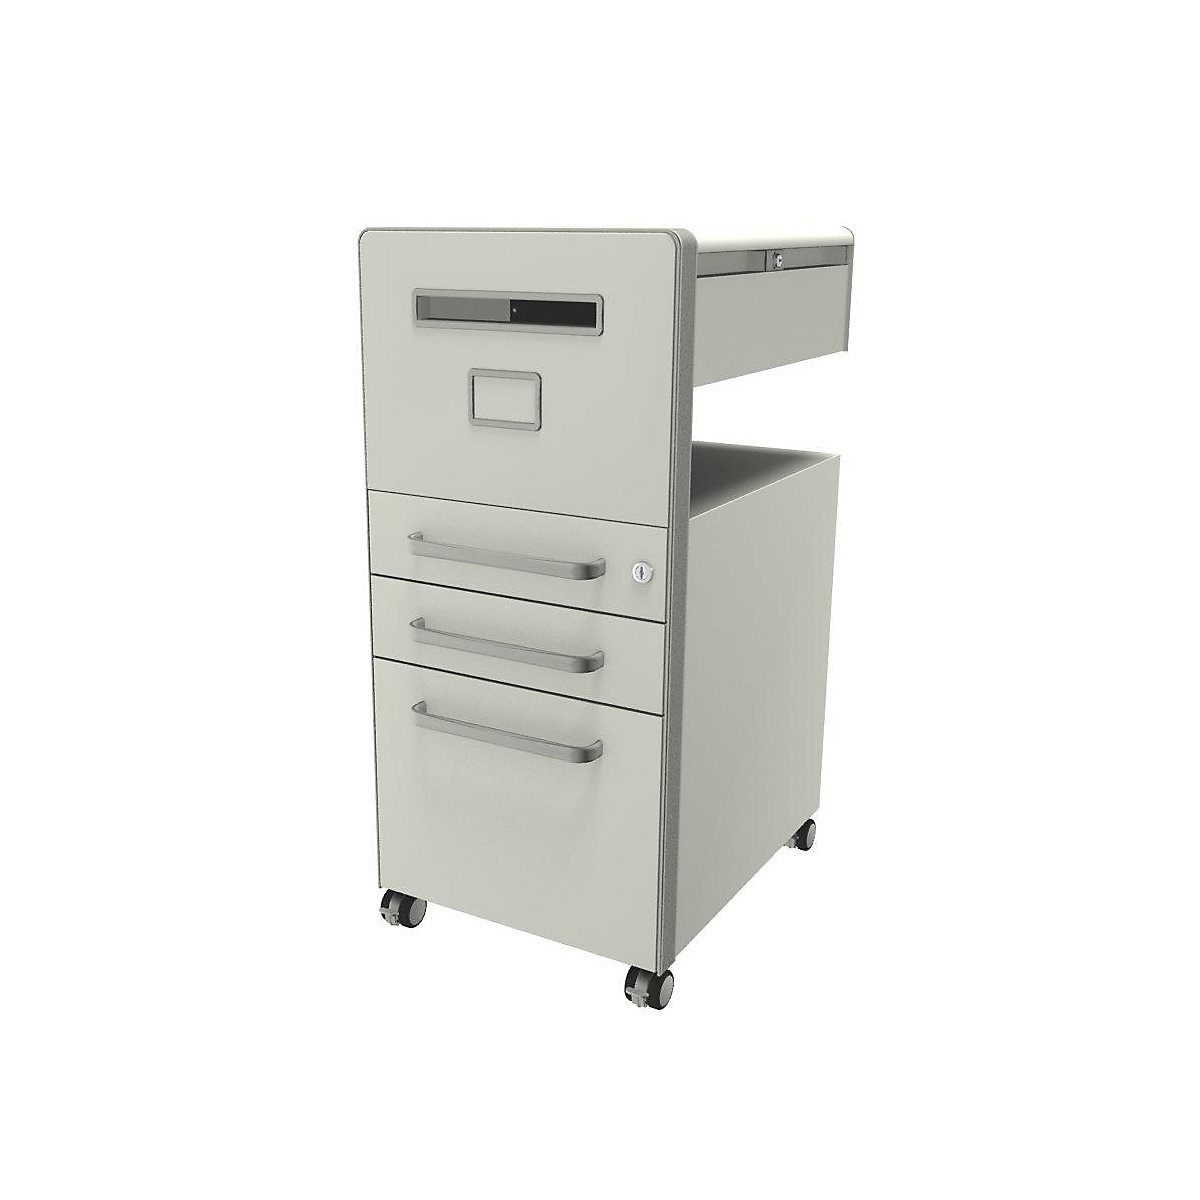 Bite™ pedestal furniture, with 1 whiteboard, opens on the left side – BISLEY, with 2 universal drawers, 1 suspension file drawer, pure white-26